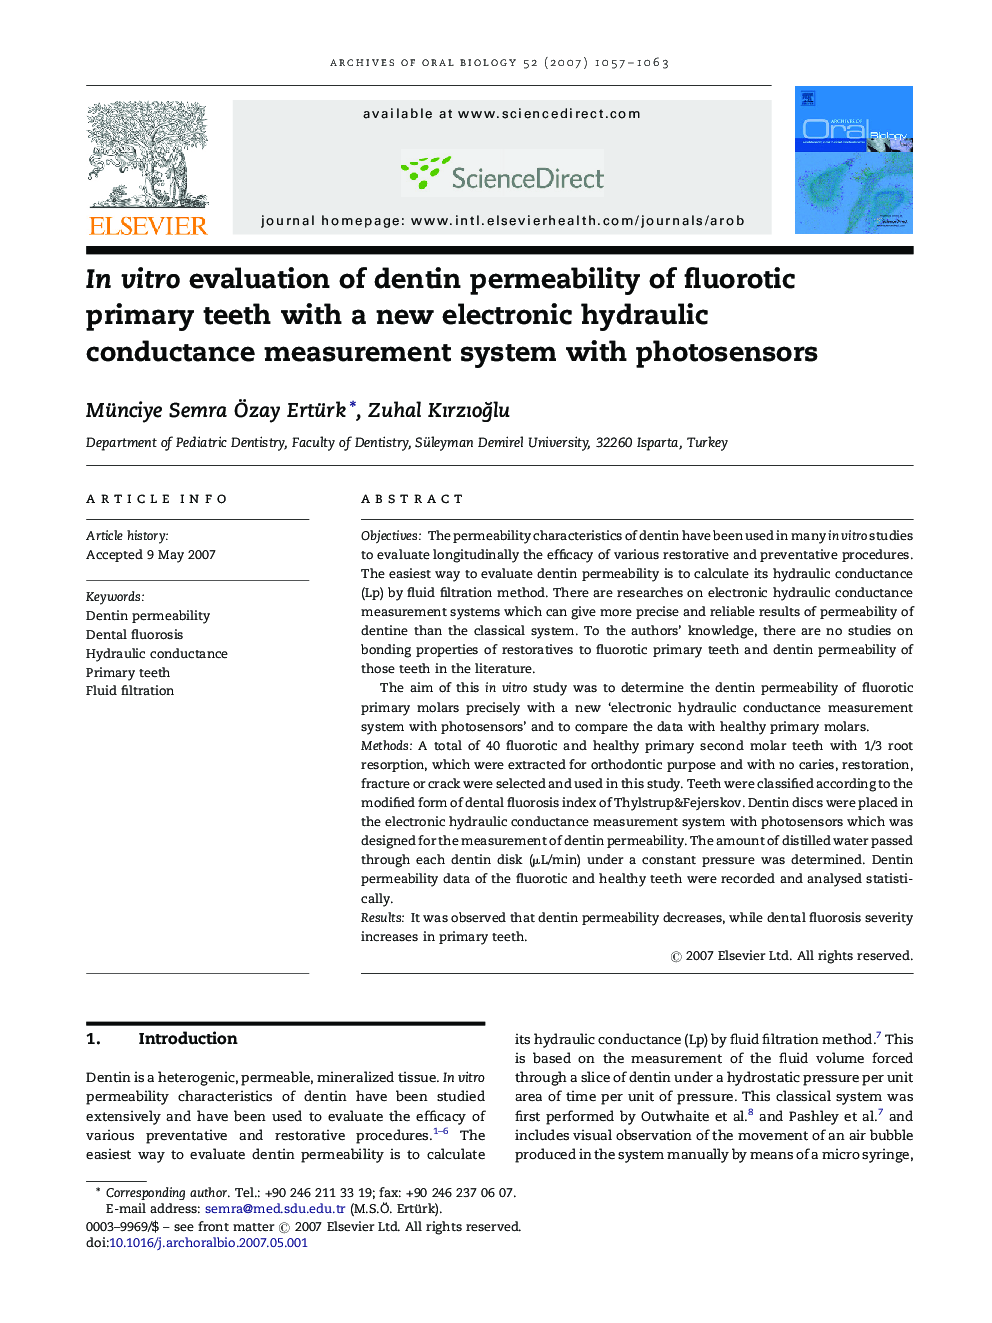 In vitro evaluation of dentin permeability of fluorotic primary teeth with a new electronic hydraulic conductance measurement system with photosensors